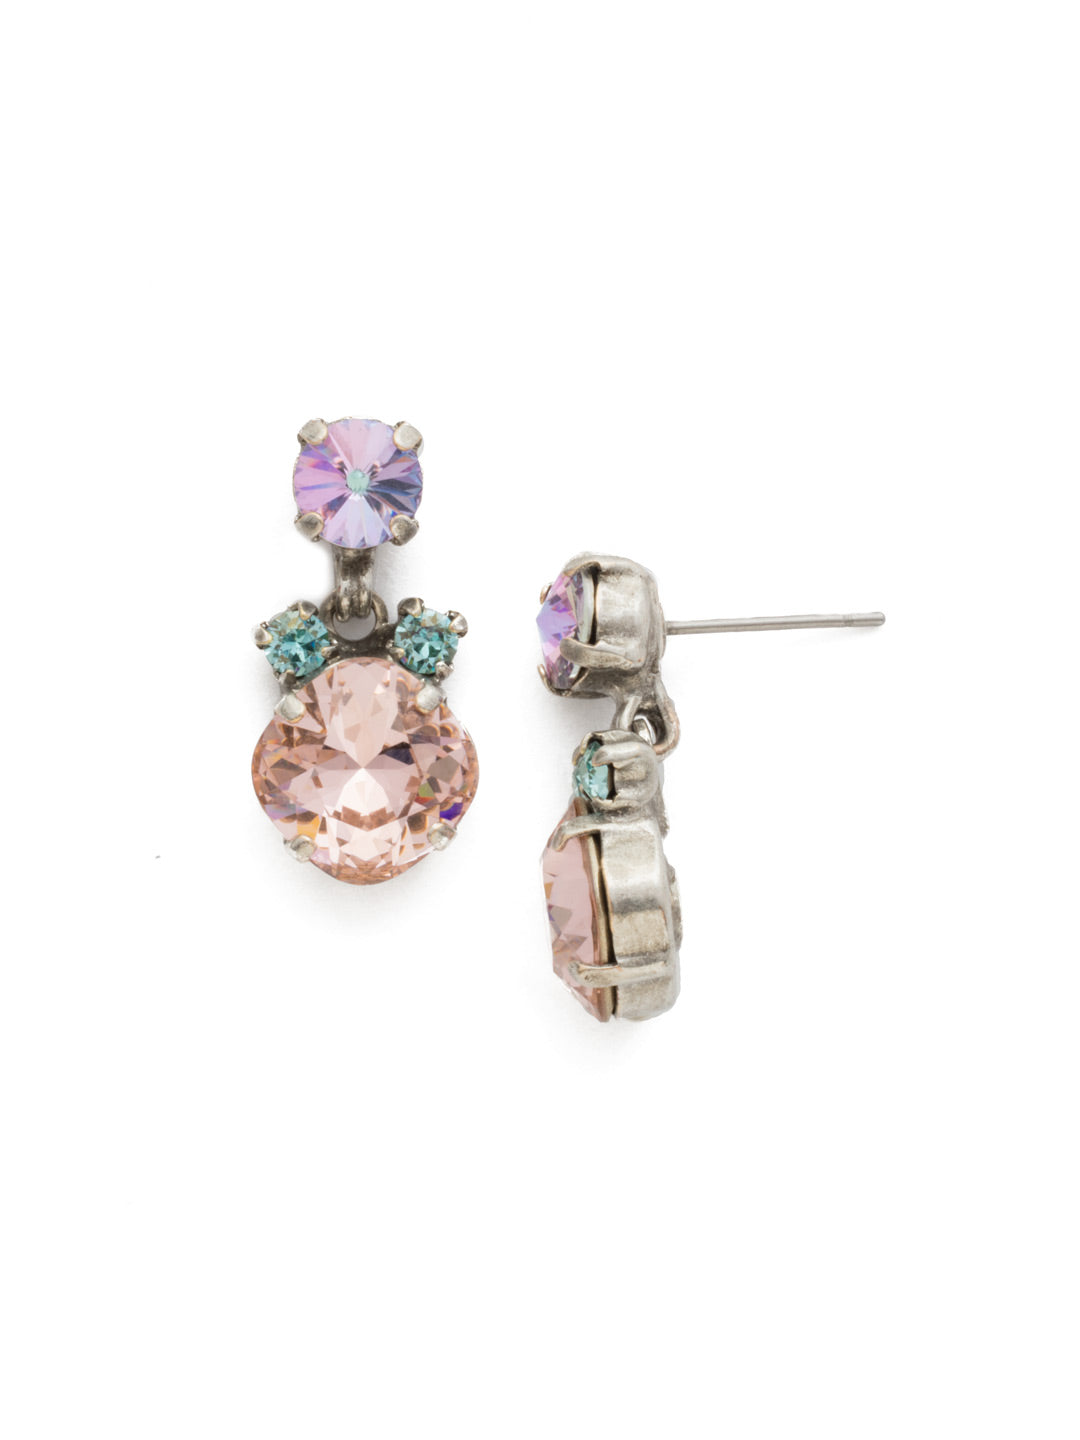 Balsam Earring - EDQ15ASLPA - A pretty pattern of cushion cut and round crystals. Vintage-inspired styling at its finest!